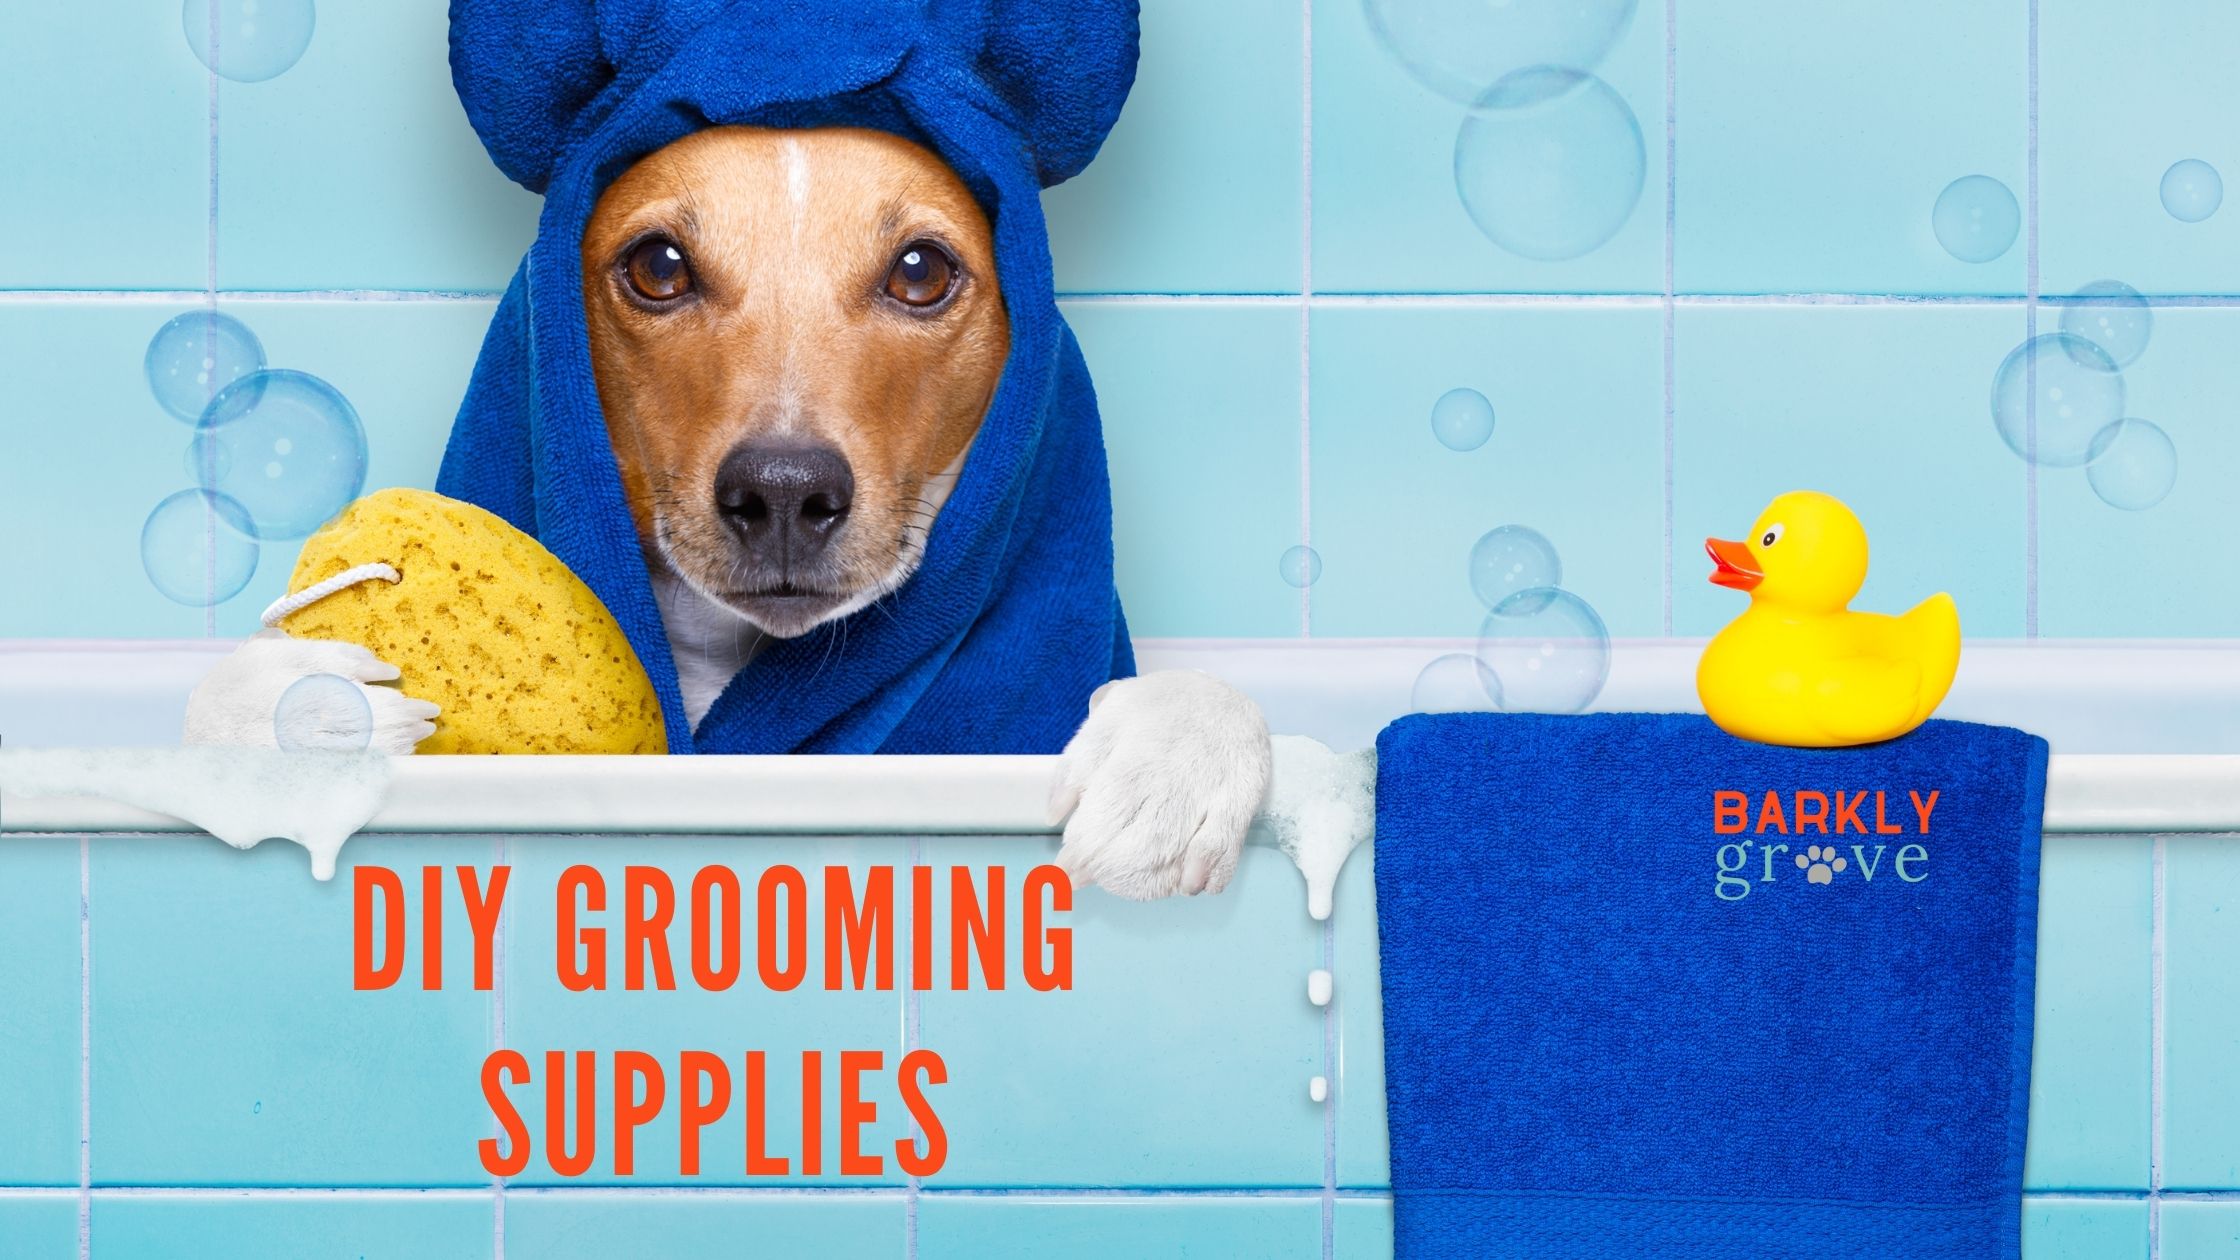 What to ask the groomer